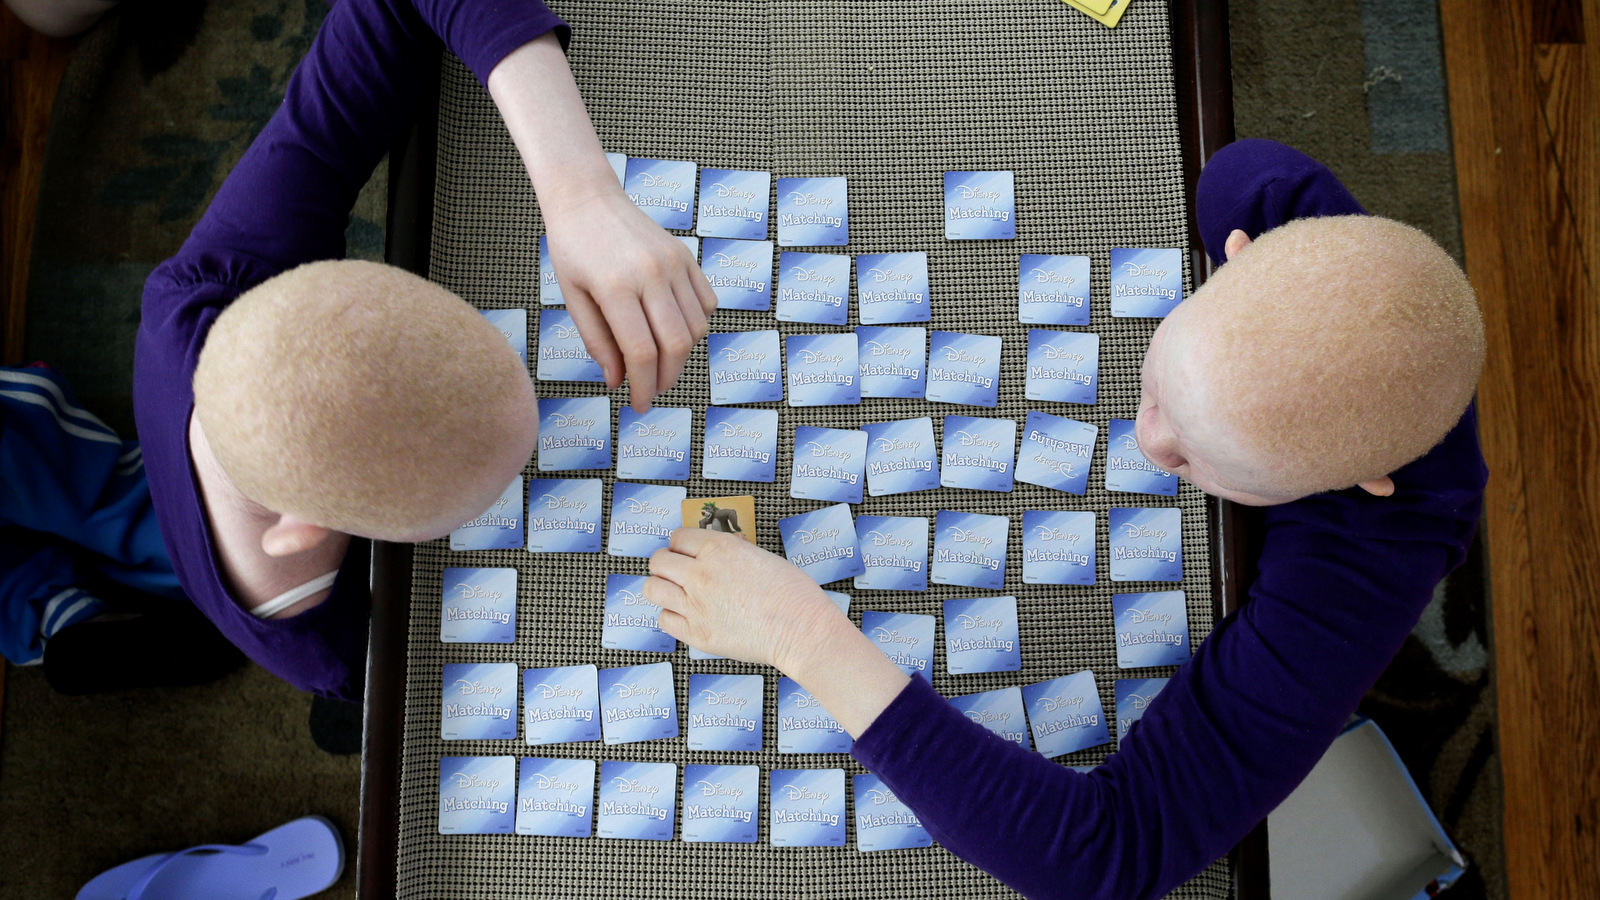 Pendo Noni, left, and Kabula Masanja play a memory card game in New York on Tuesday, July 28, 2015. One out of every 1,400 citizens in Tanzania has albinism. Pendo and Kabula were attacked and dismembered in the belief that their body parts will bring wealth. (AP Photo/Julie Jacobson)